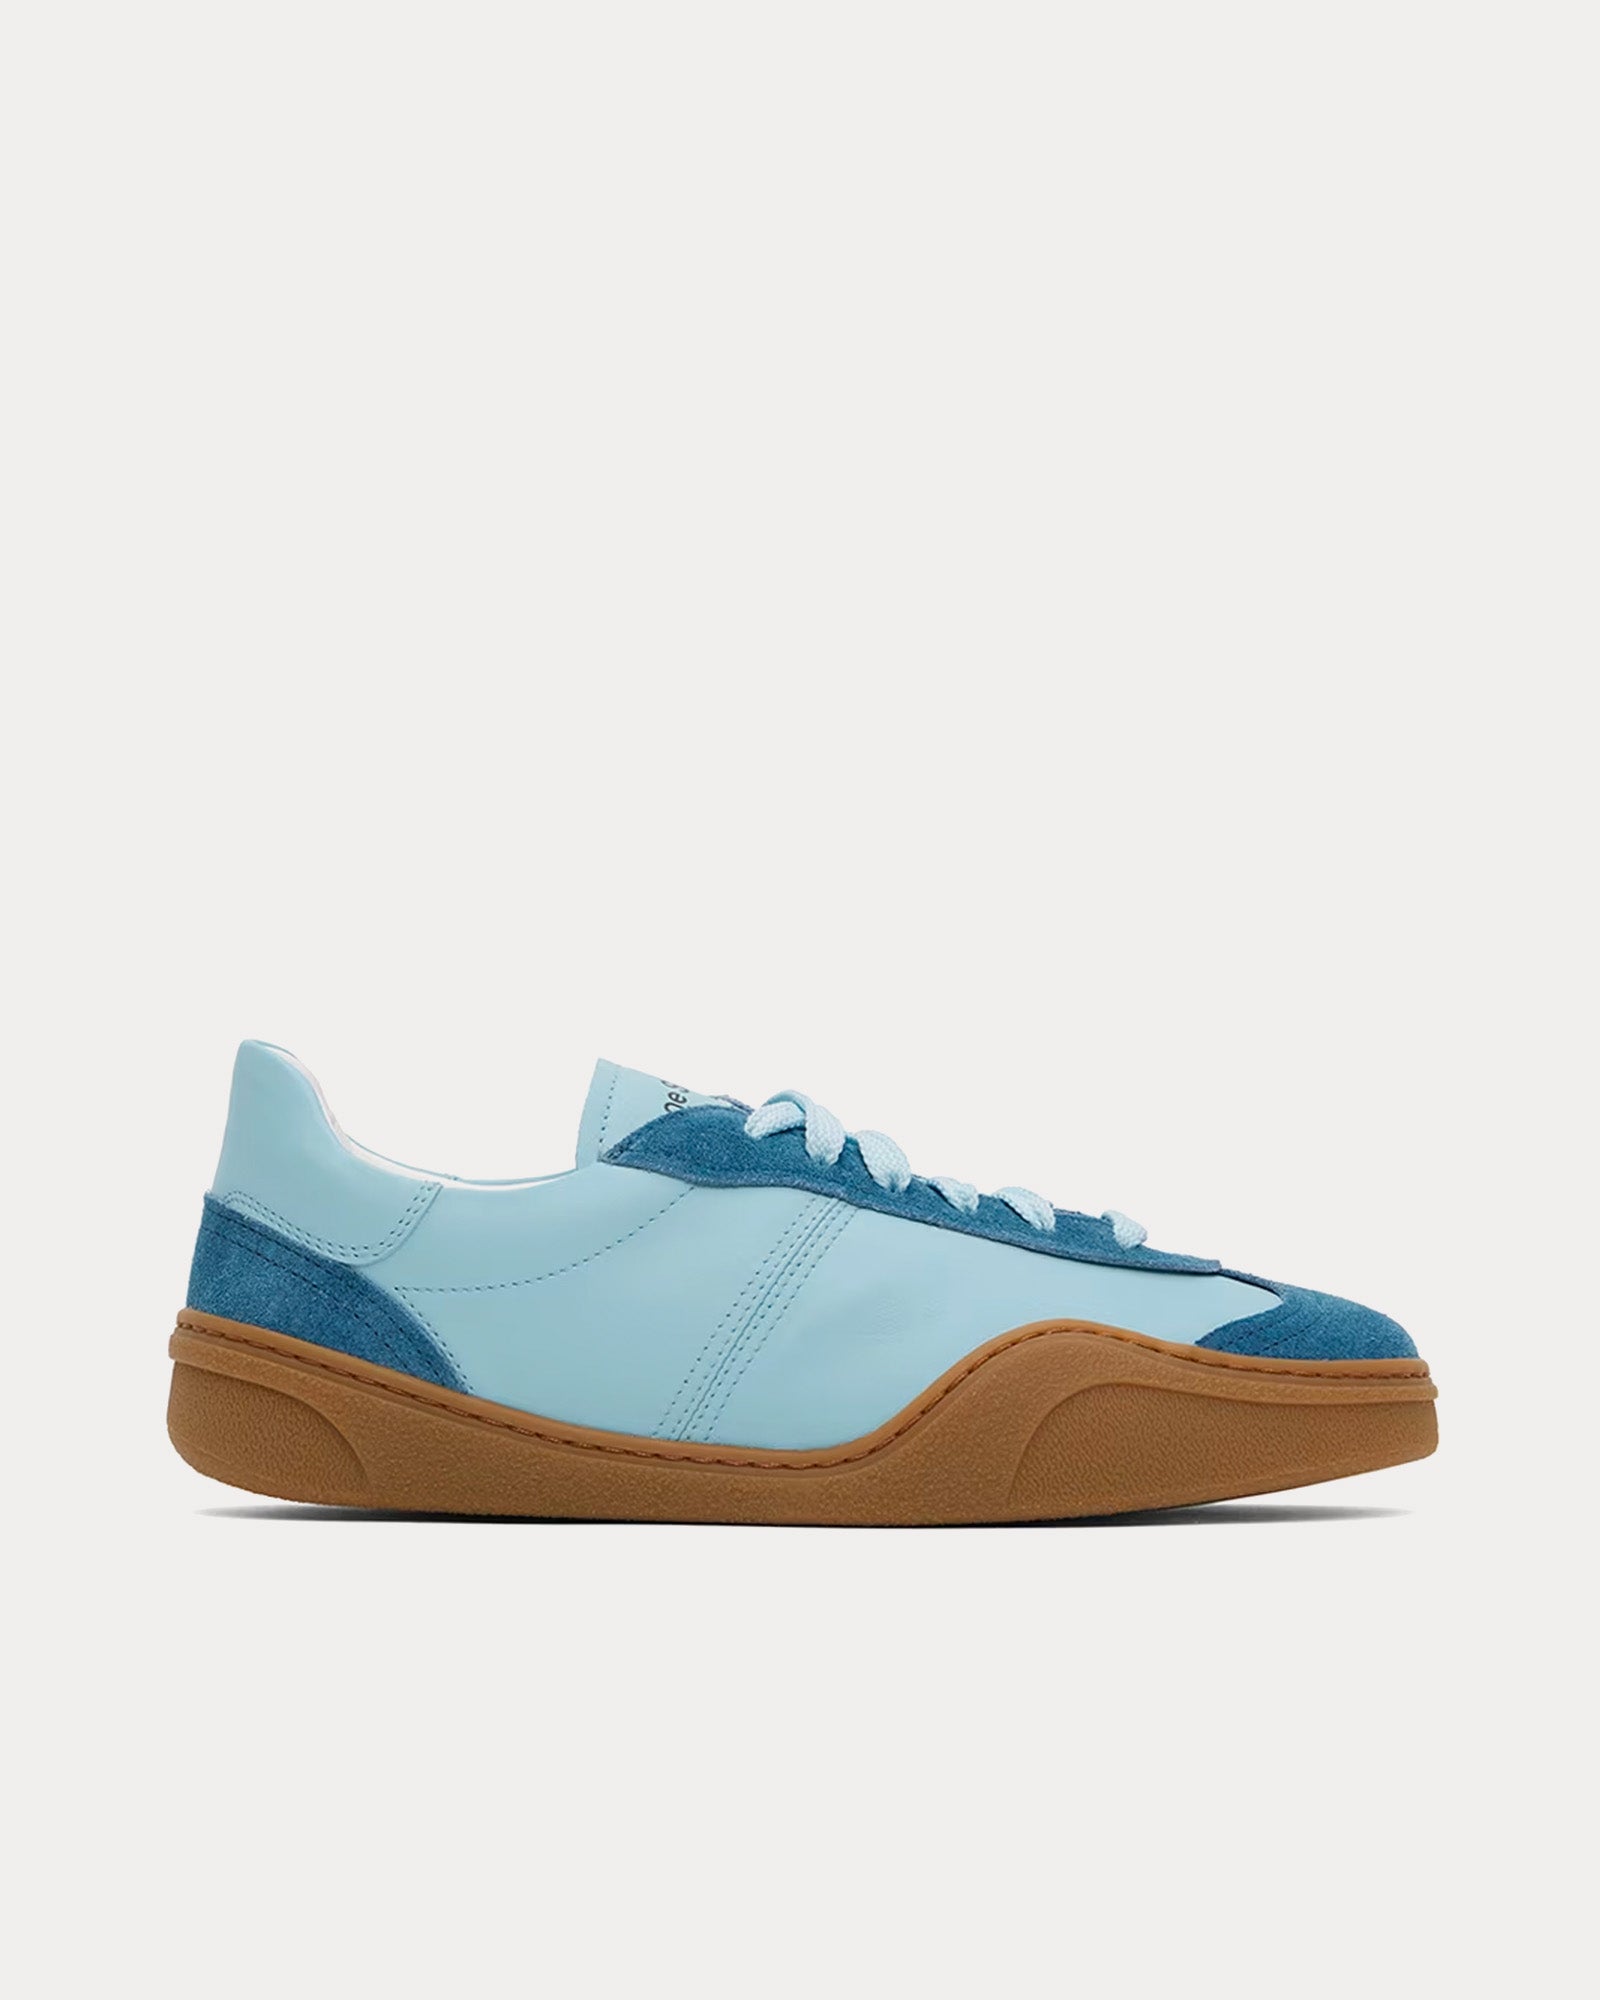 Acne Studios - Bars Lace-Up Light Blue / Brown Low Top Sneakers